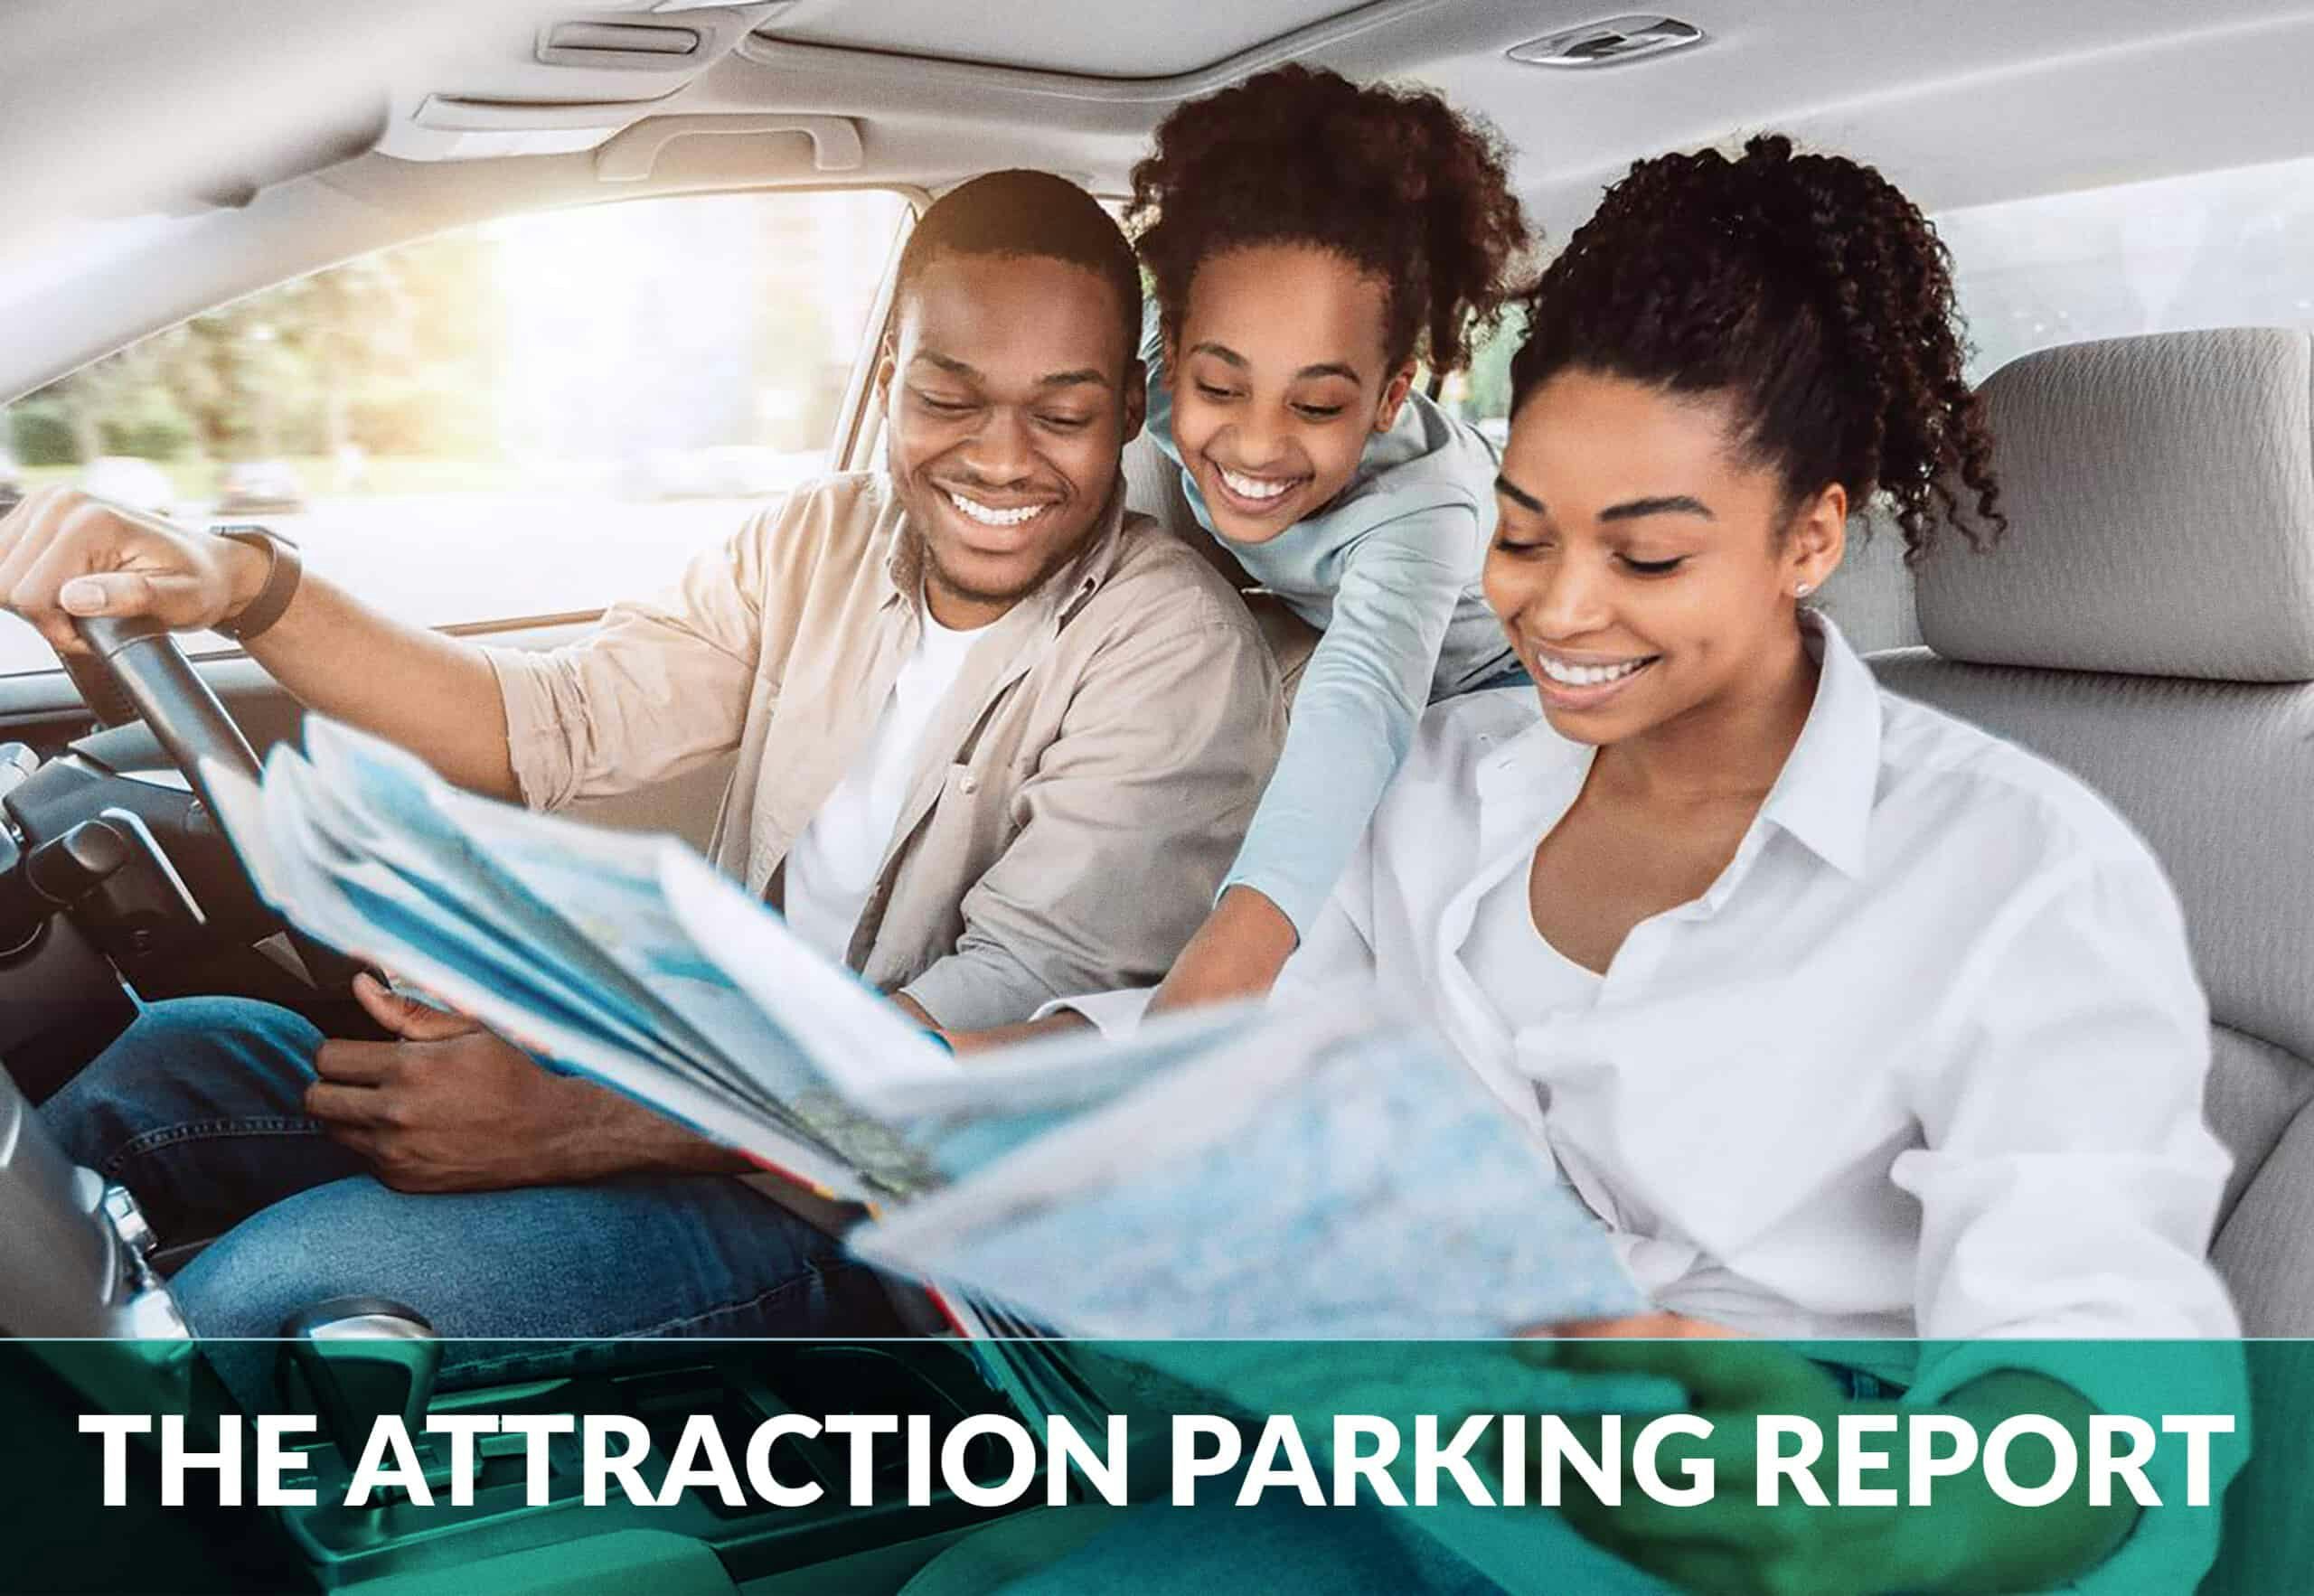 The attraction car parking report